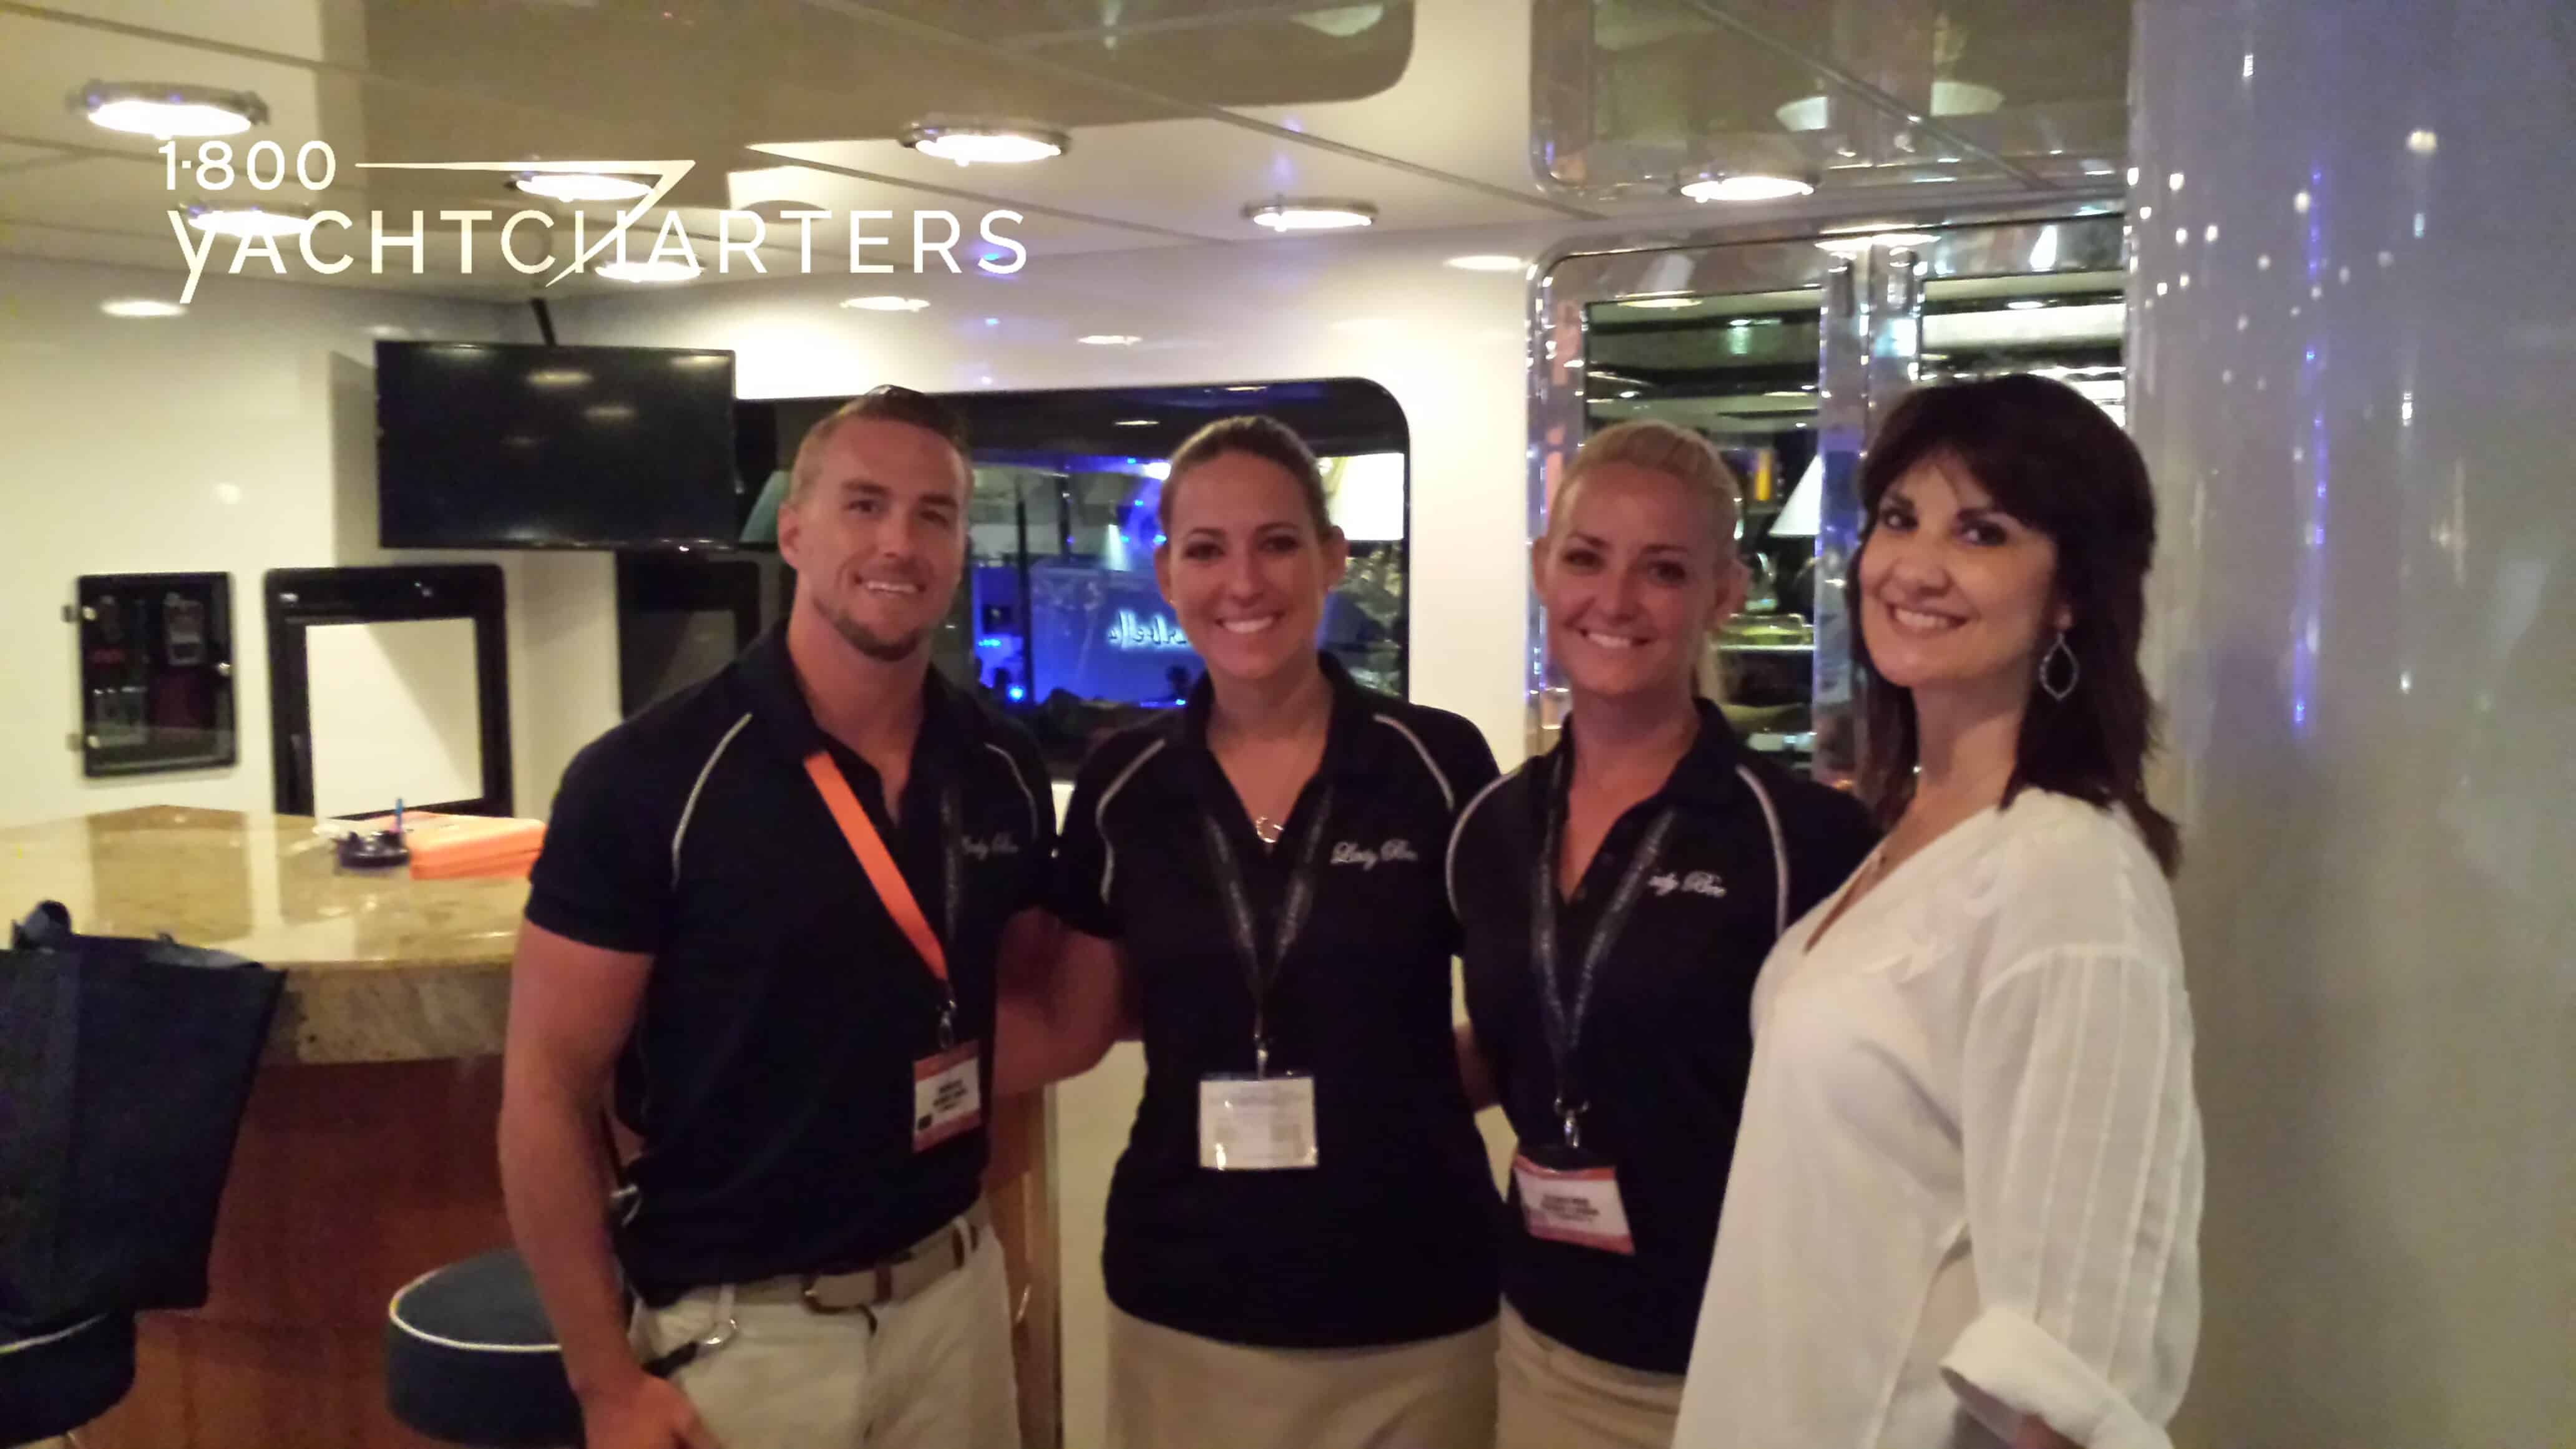 Photograph of 4 people, smiling at the camera. They are standing in the main salon of a superyacht. The three people on the left of the photo are wearing black t-shirts and name badges on lanyards. The person on the right side of the photo is wearing a white blouse and gold name badge. 